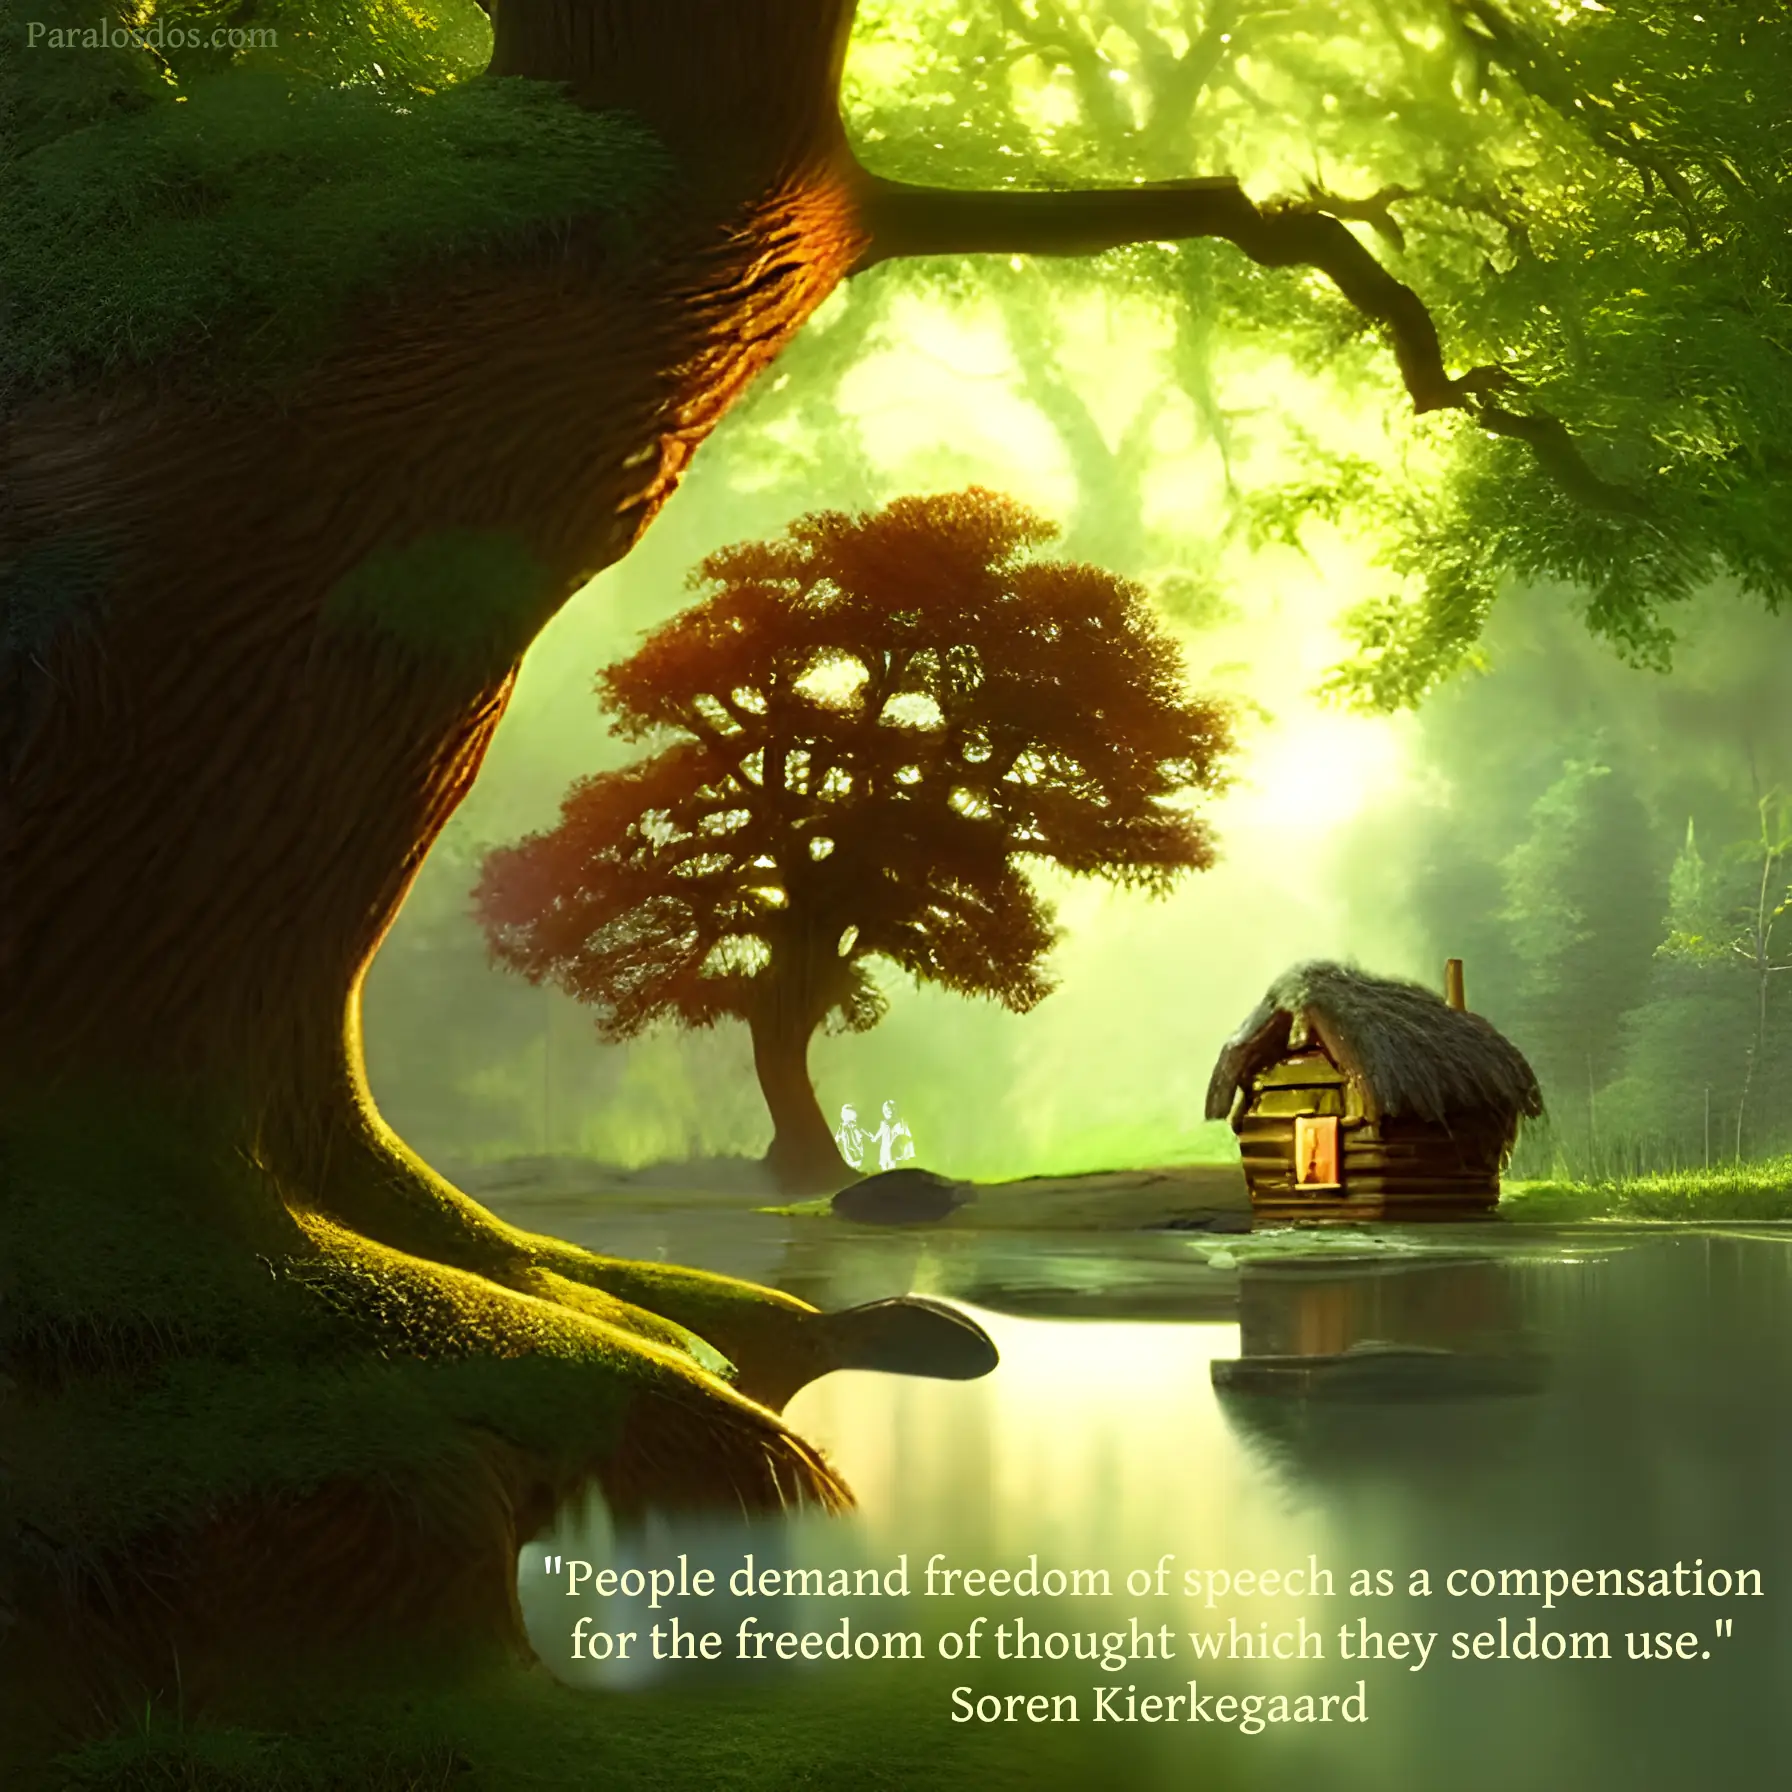 An artistic rendering of a small cabin on the edge of a forest lake. The quote reads: "People demand freedom of speech as a compensation for the freedom of thought which they seldom use." Søren Kierkegaard